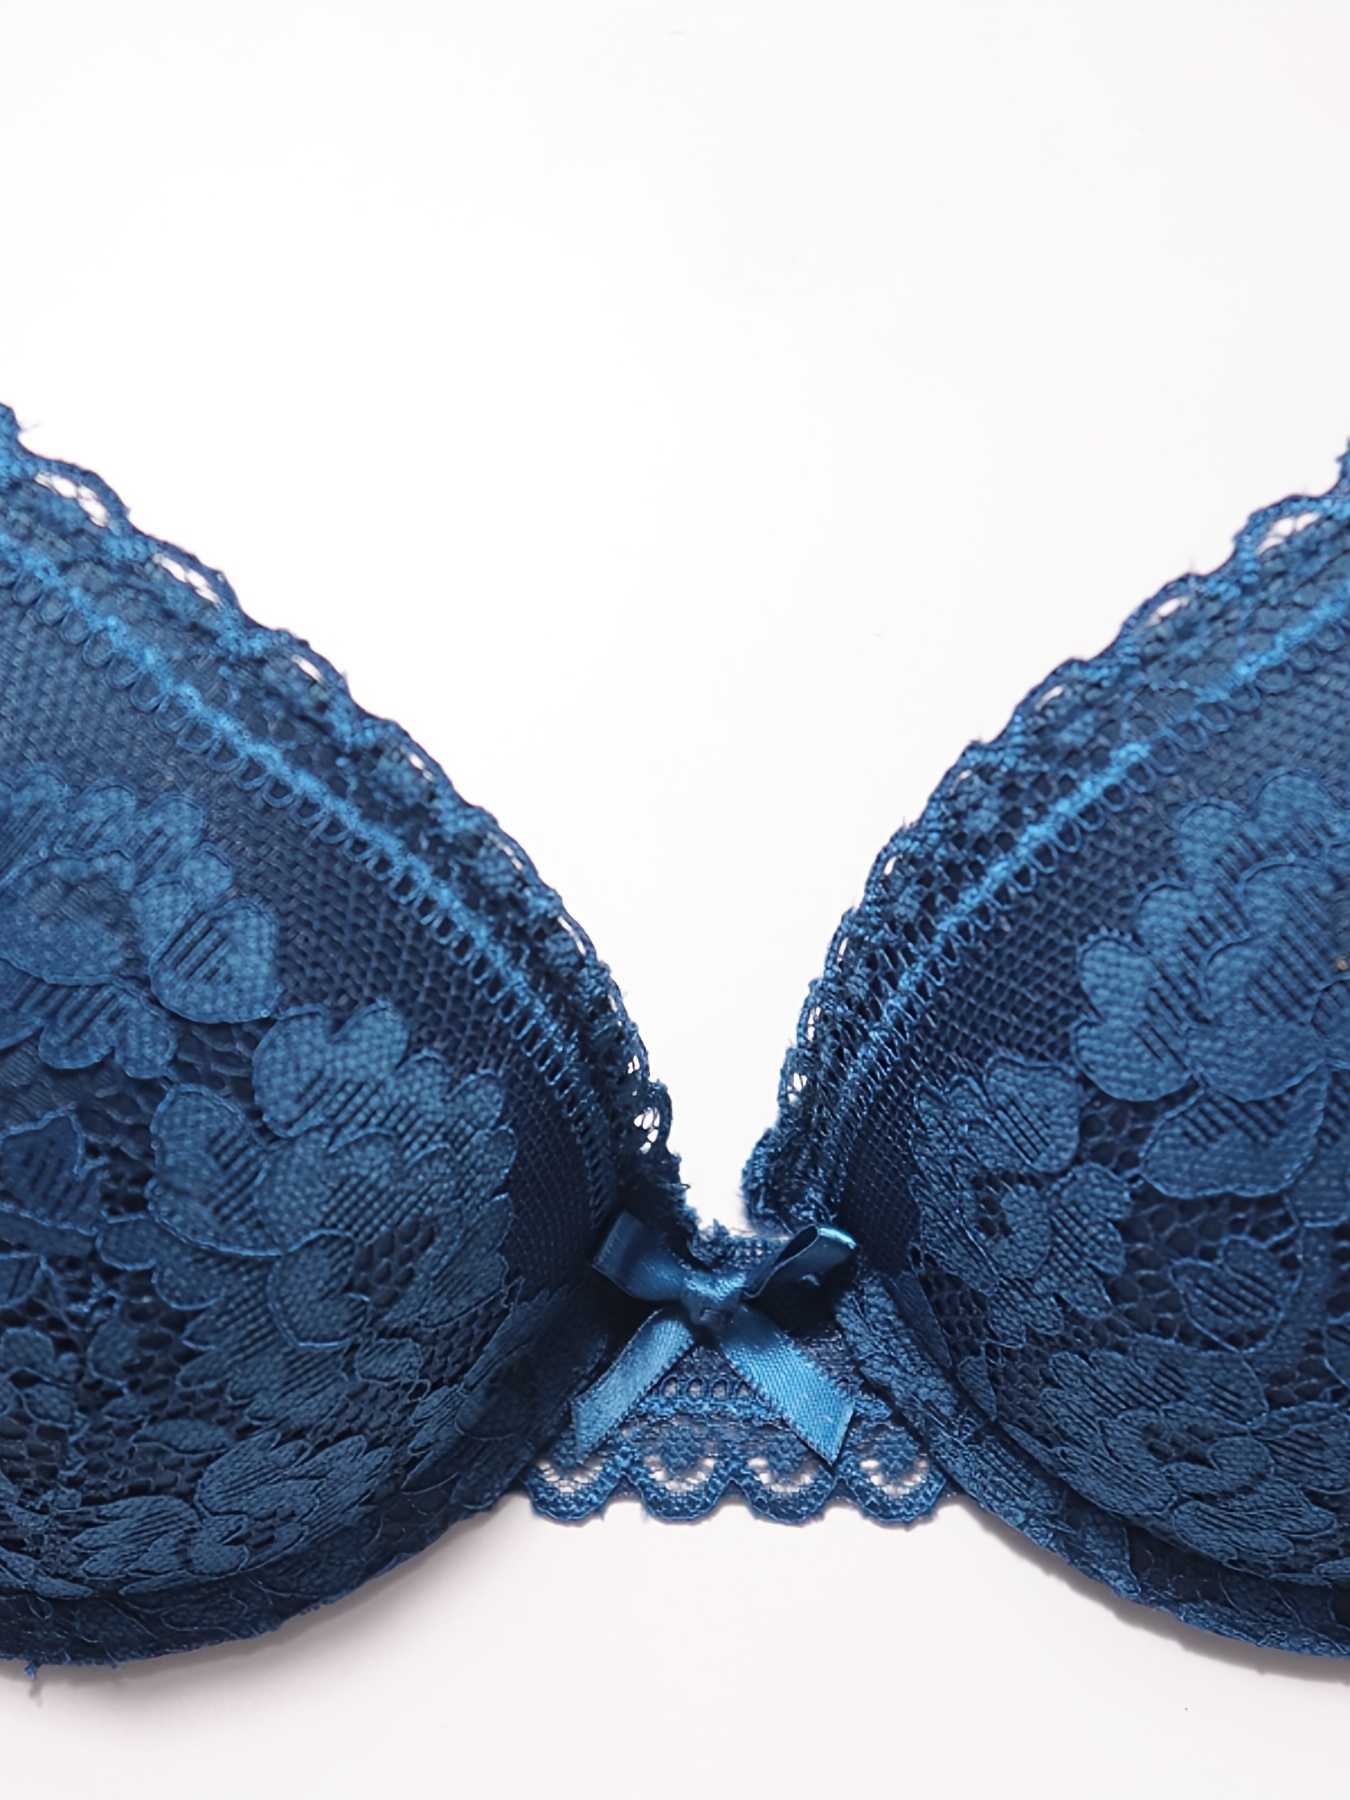 Push-Up Bra in Steel Blue and Black with Leavers lace